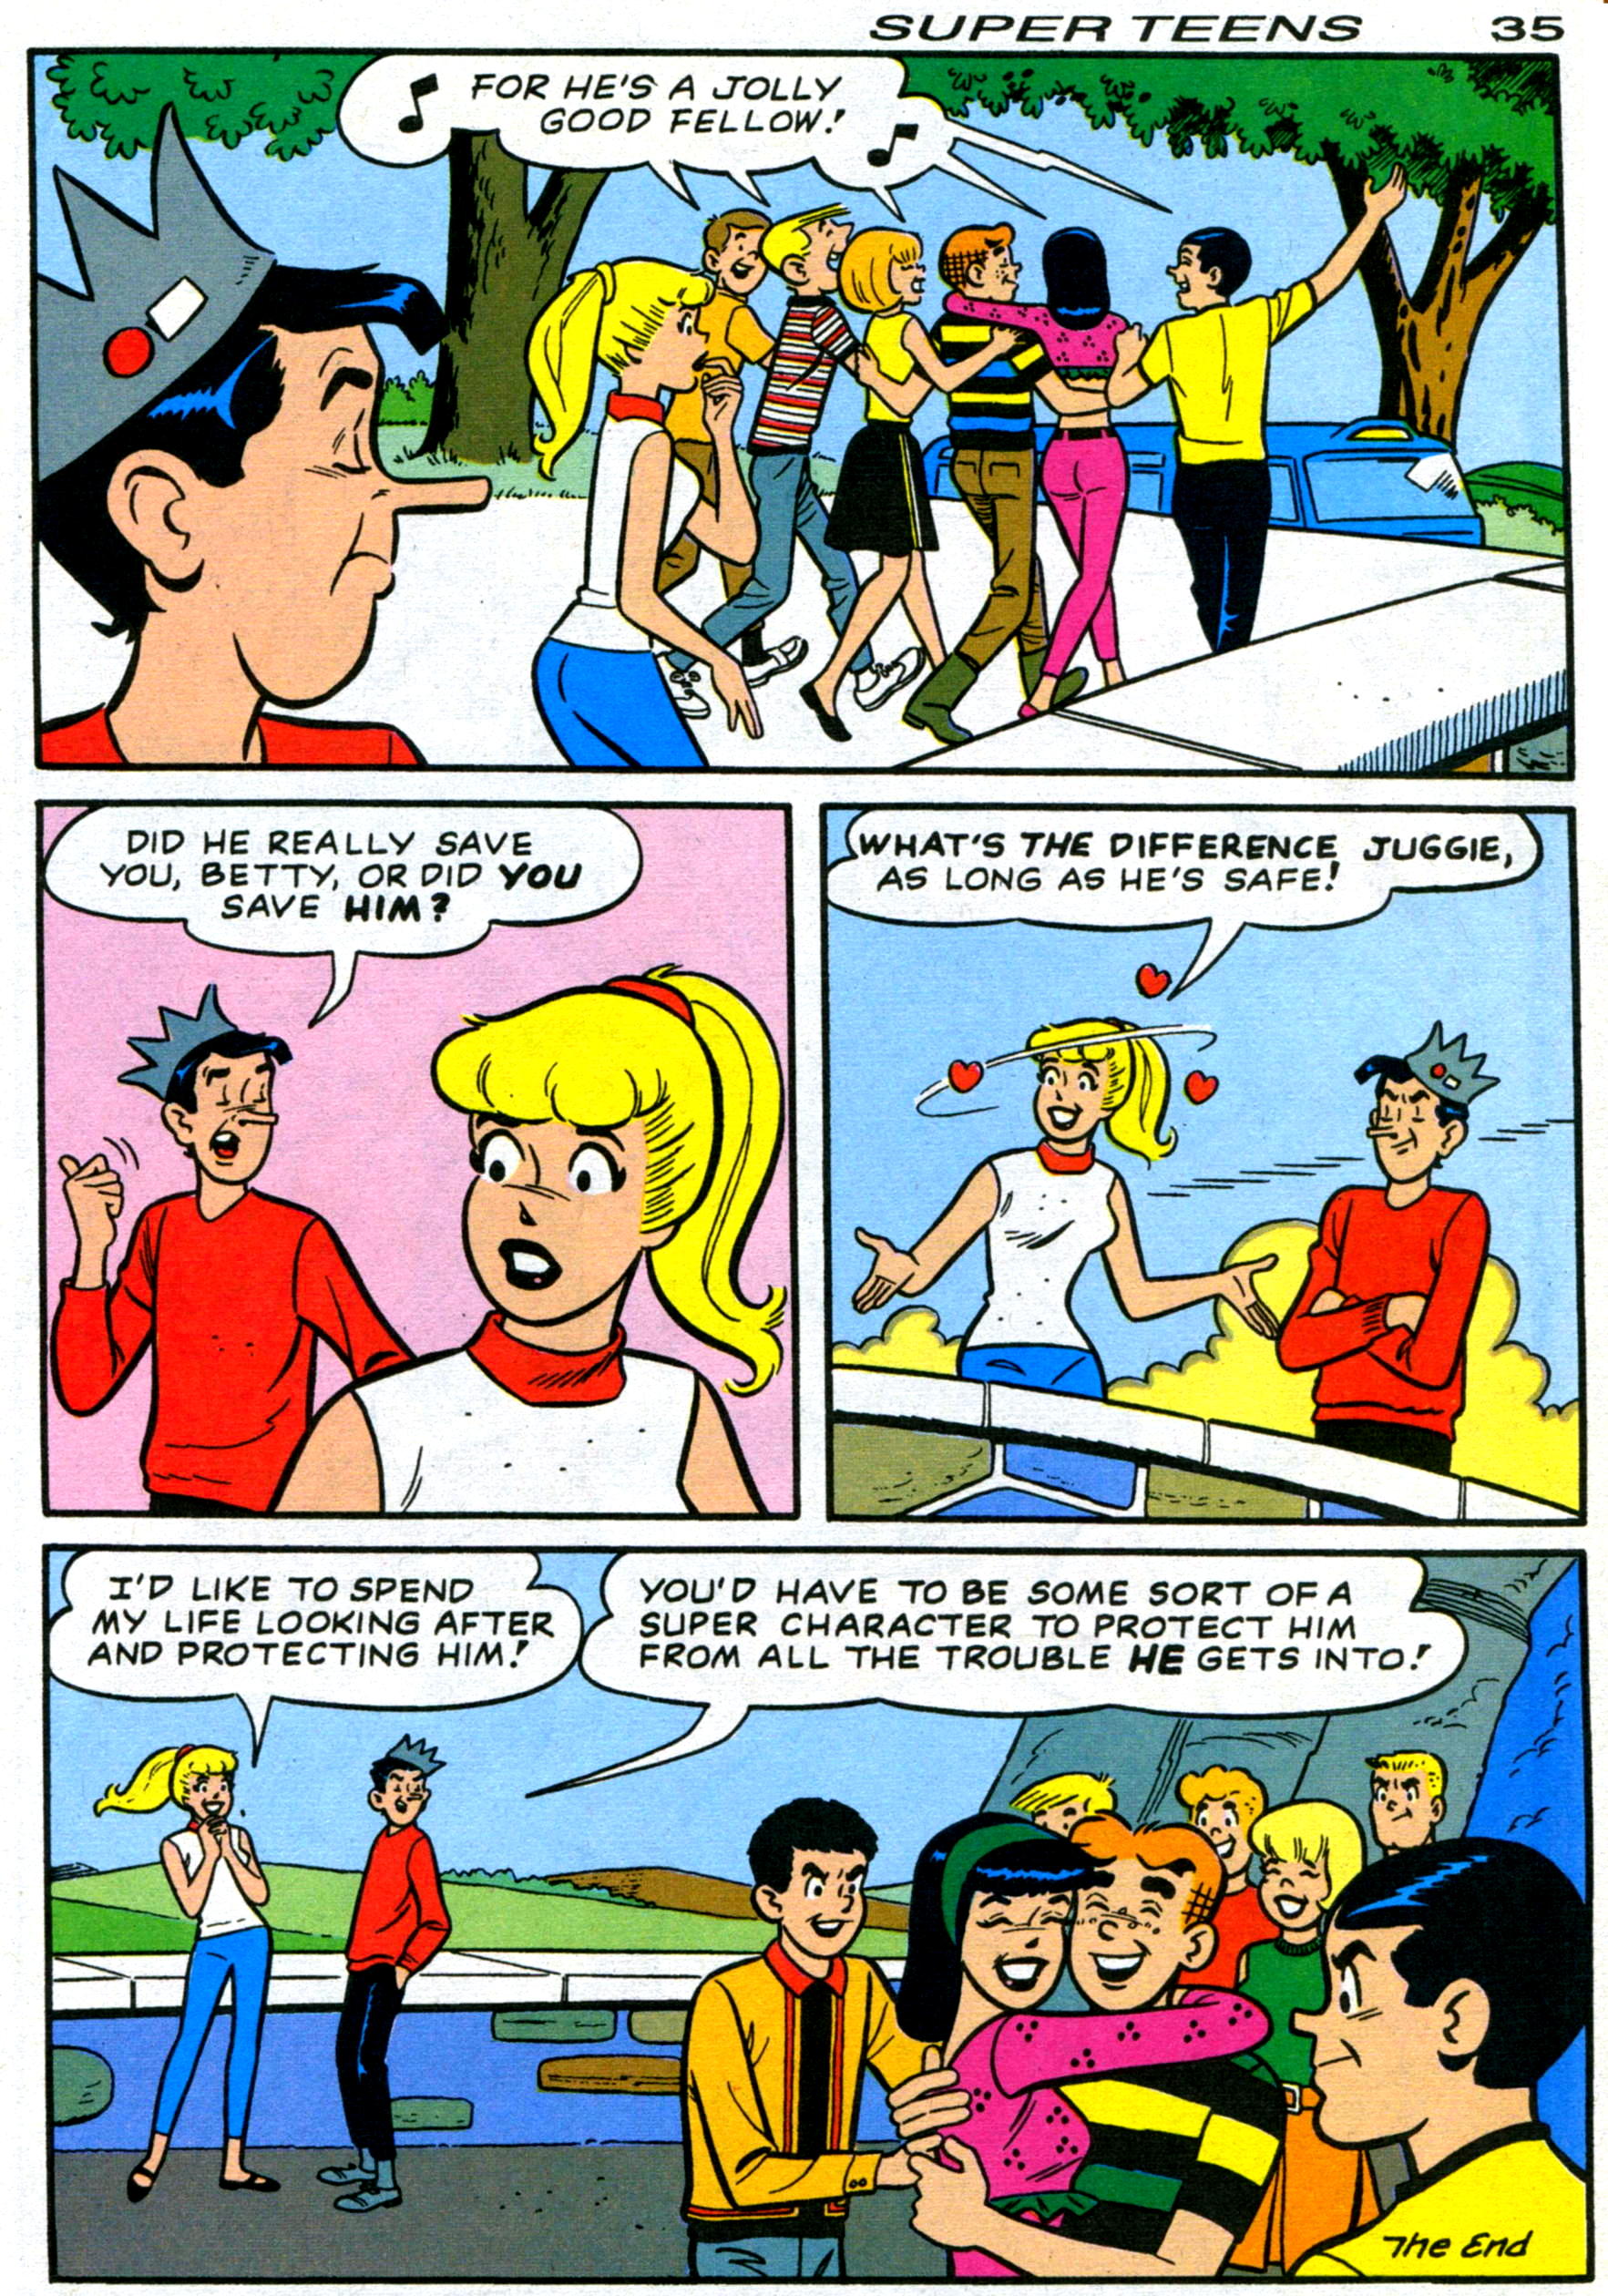 Read online Archie's Super Teens comic -  Issue #1 - 37